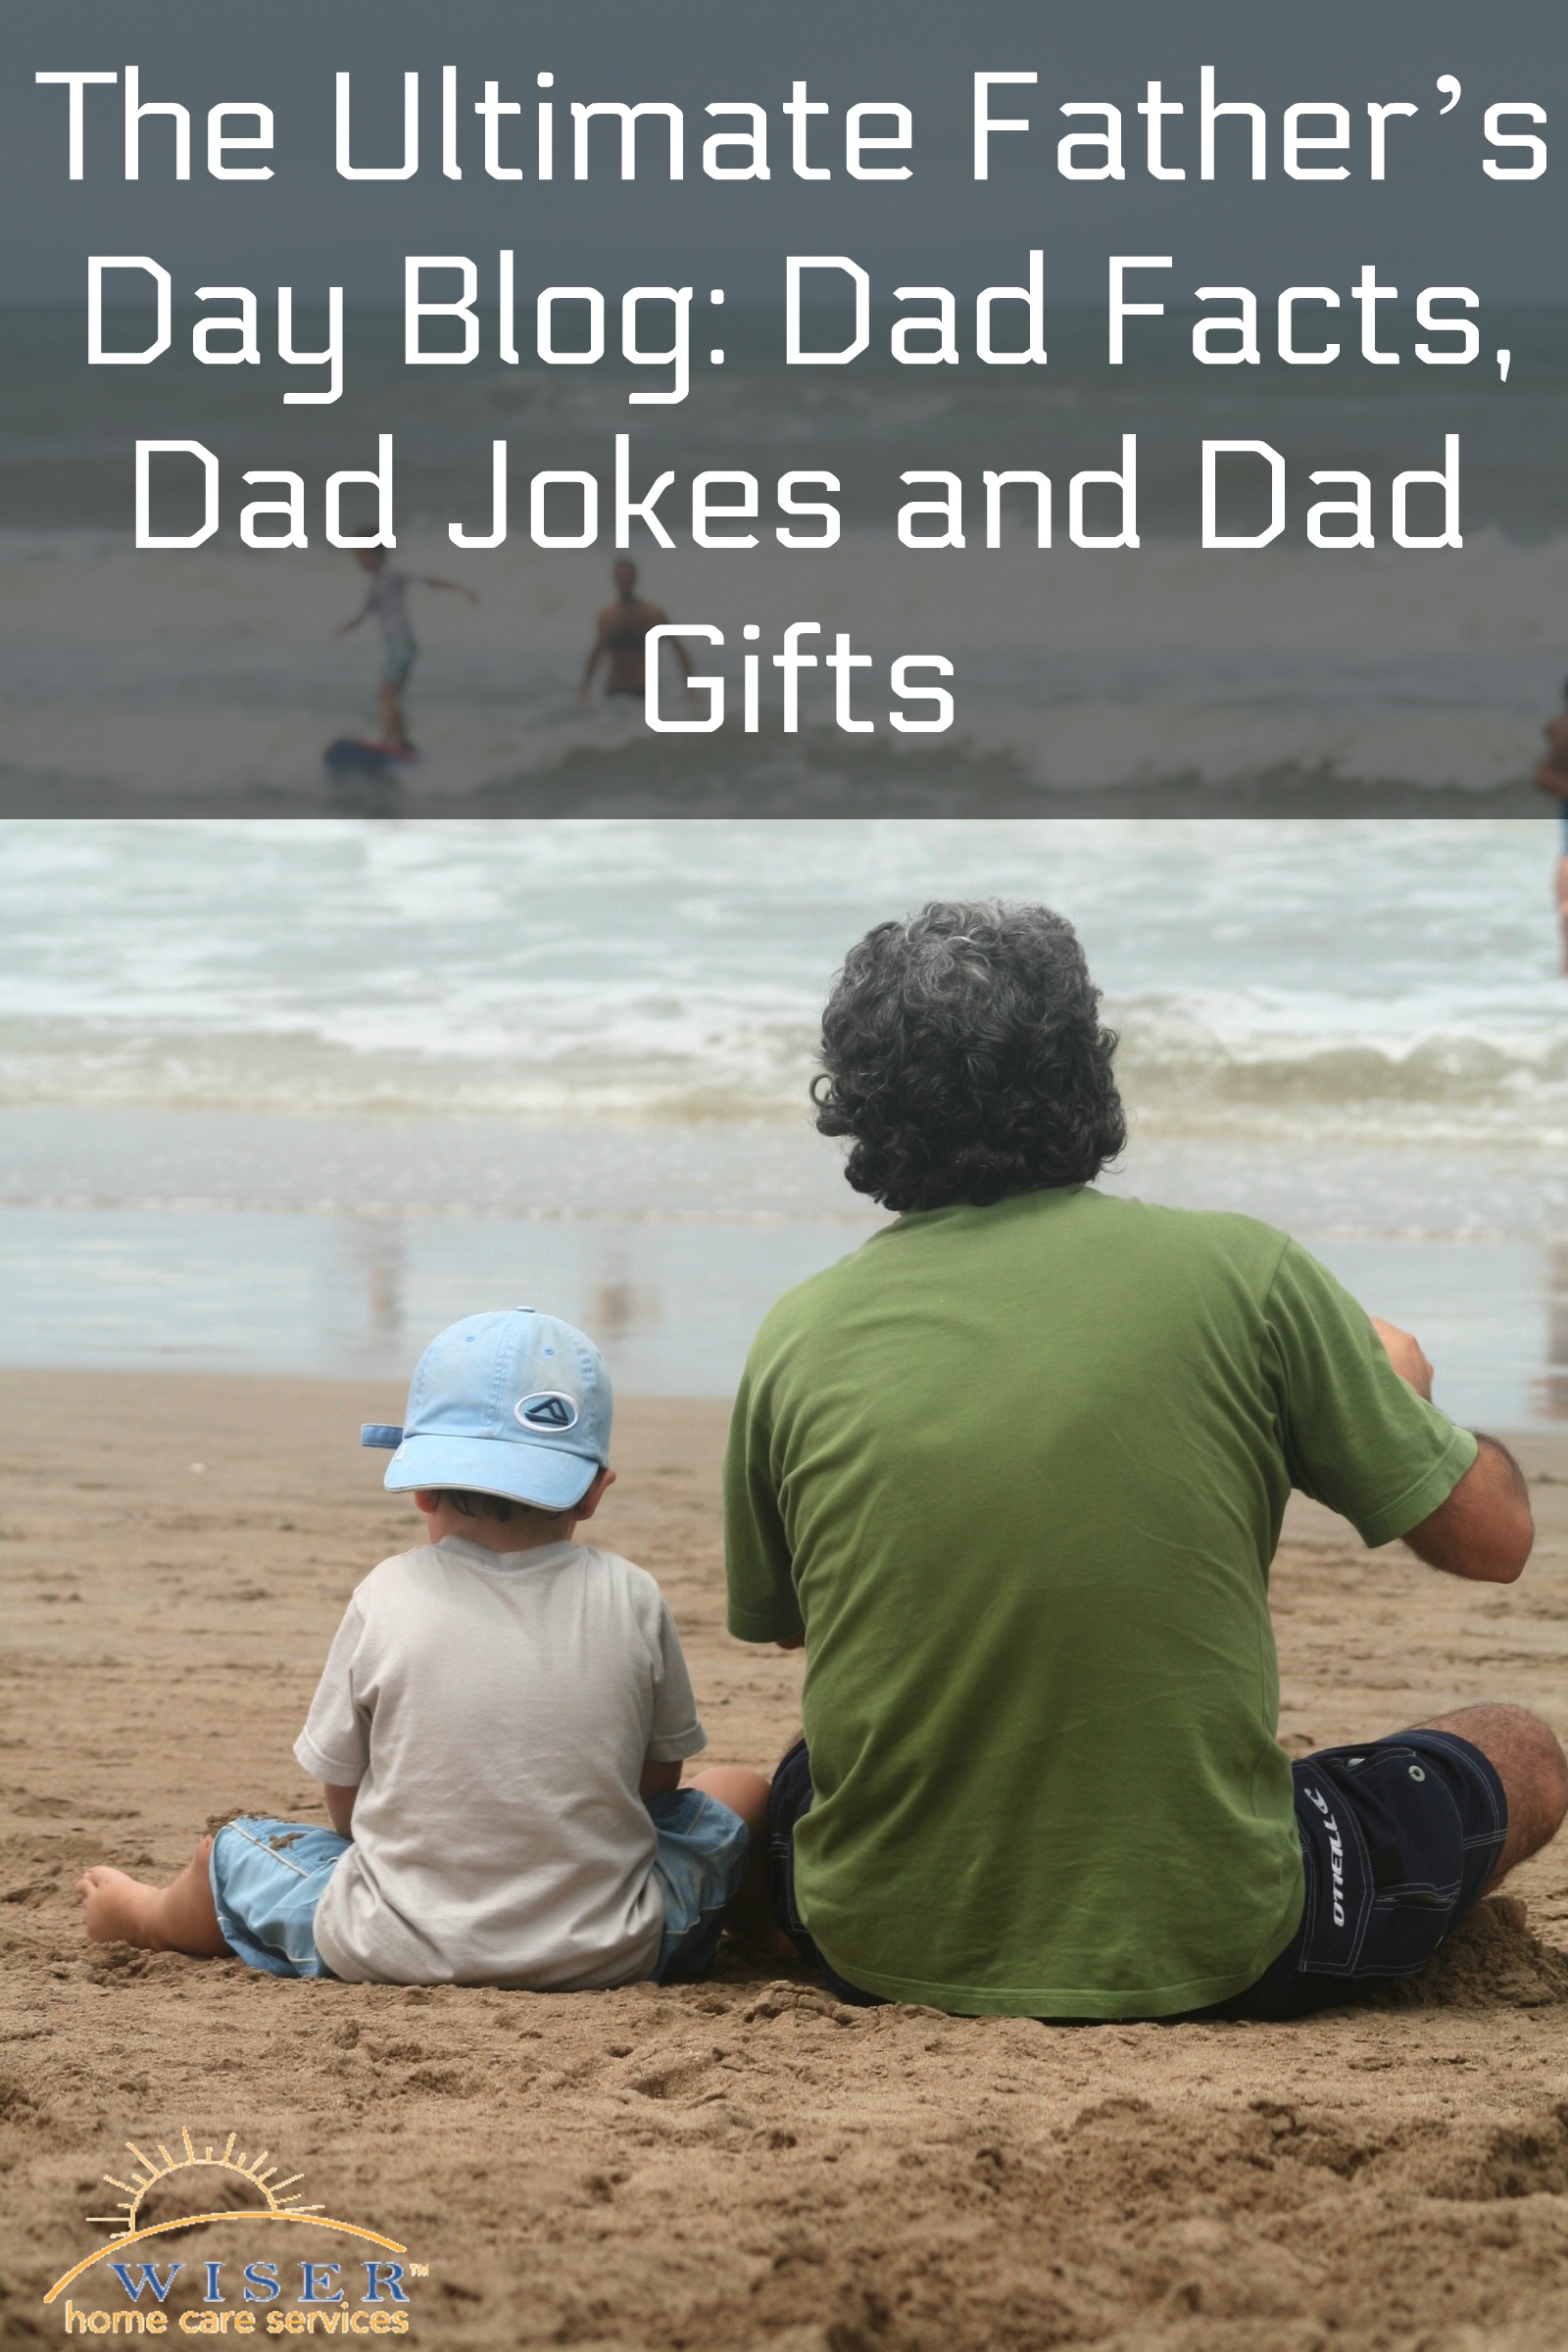 Finding the right Father’s Day gift can be difficult. In our Ultimate Father's Day blog we share our favorite Father's Day facts, jokes and gifts.